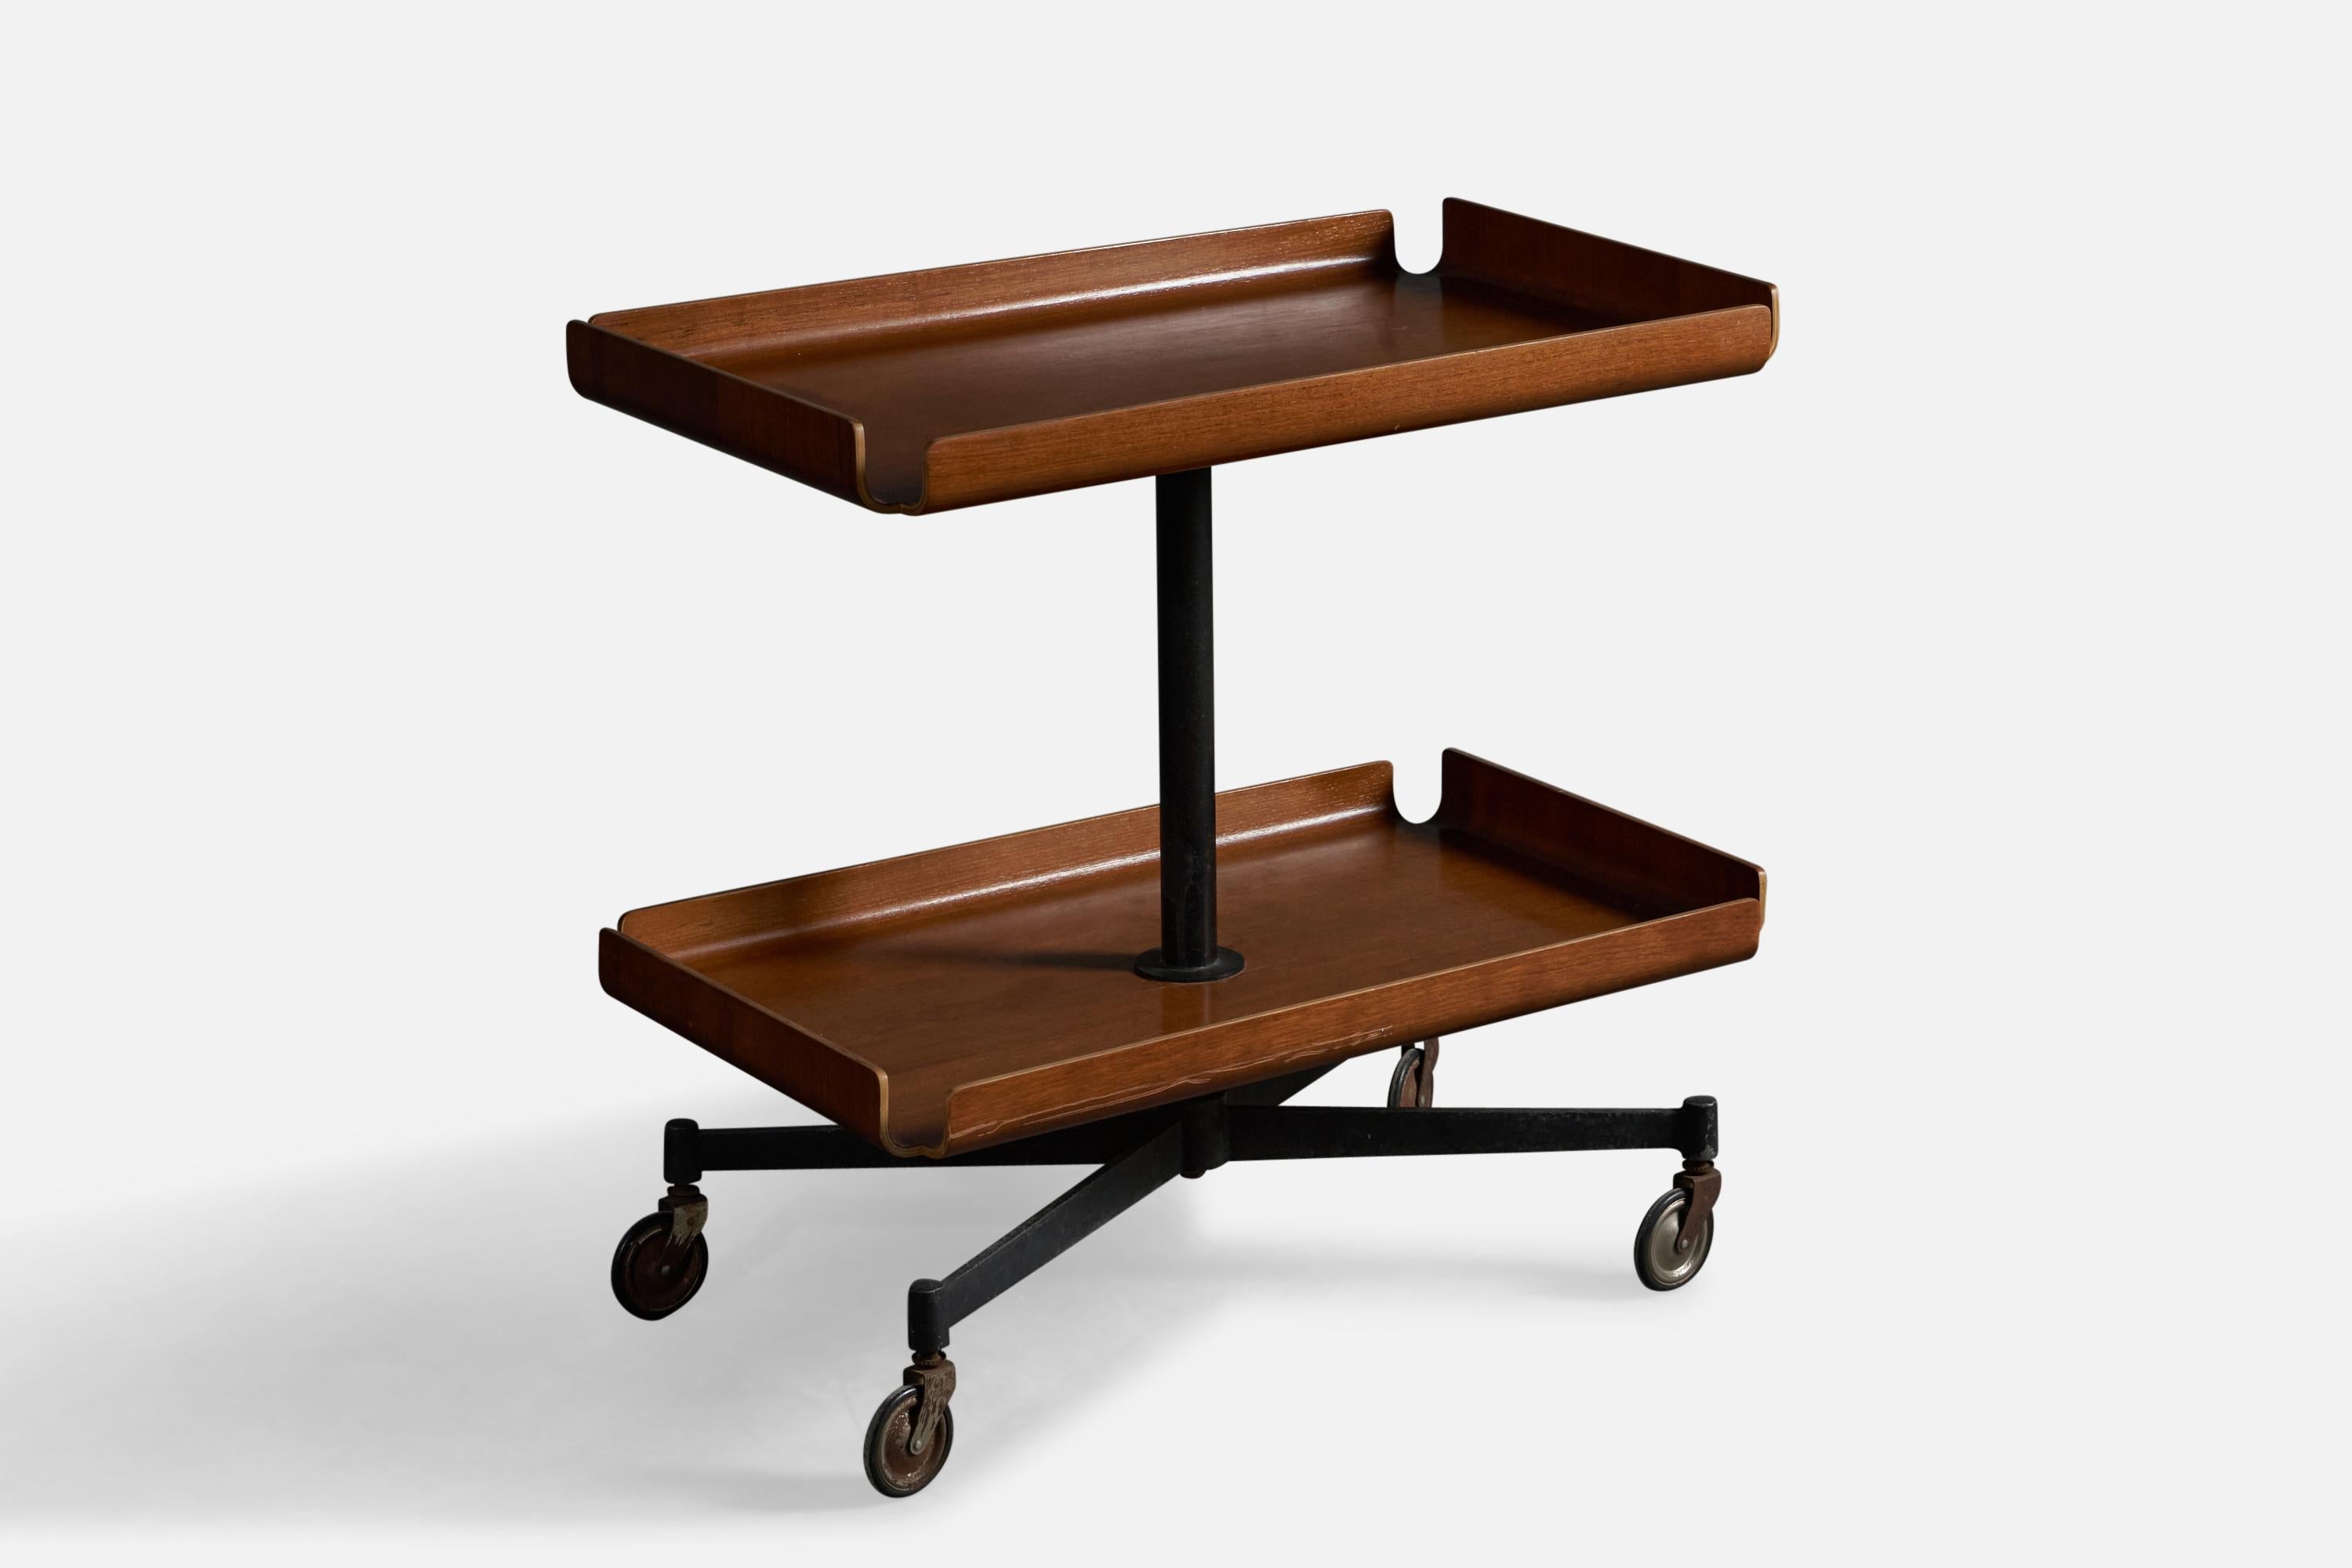 A black-lacquer metal, brass and moulded walnut plywood bar cart, design attributed to Campo & Graffi, presumably manufactured by Home, Italy, c. 1950s.